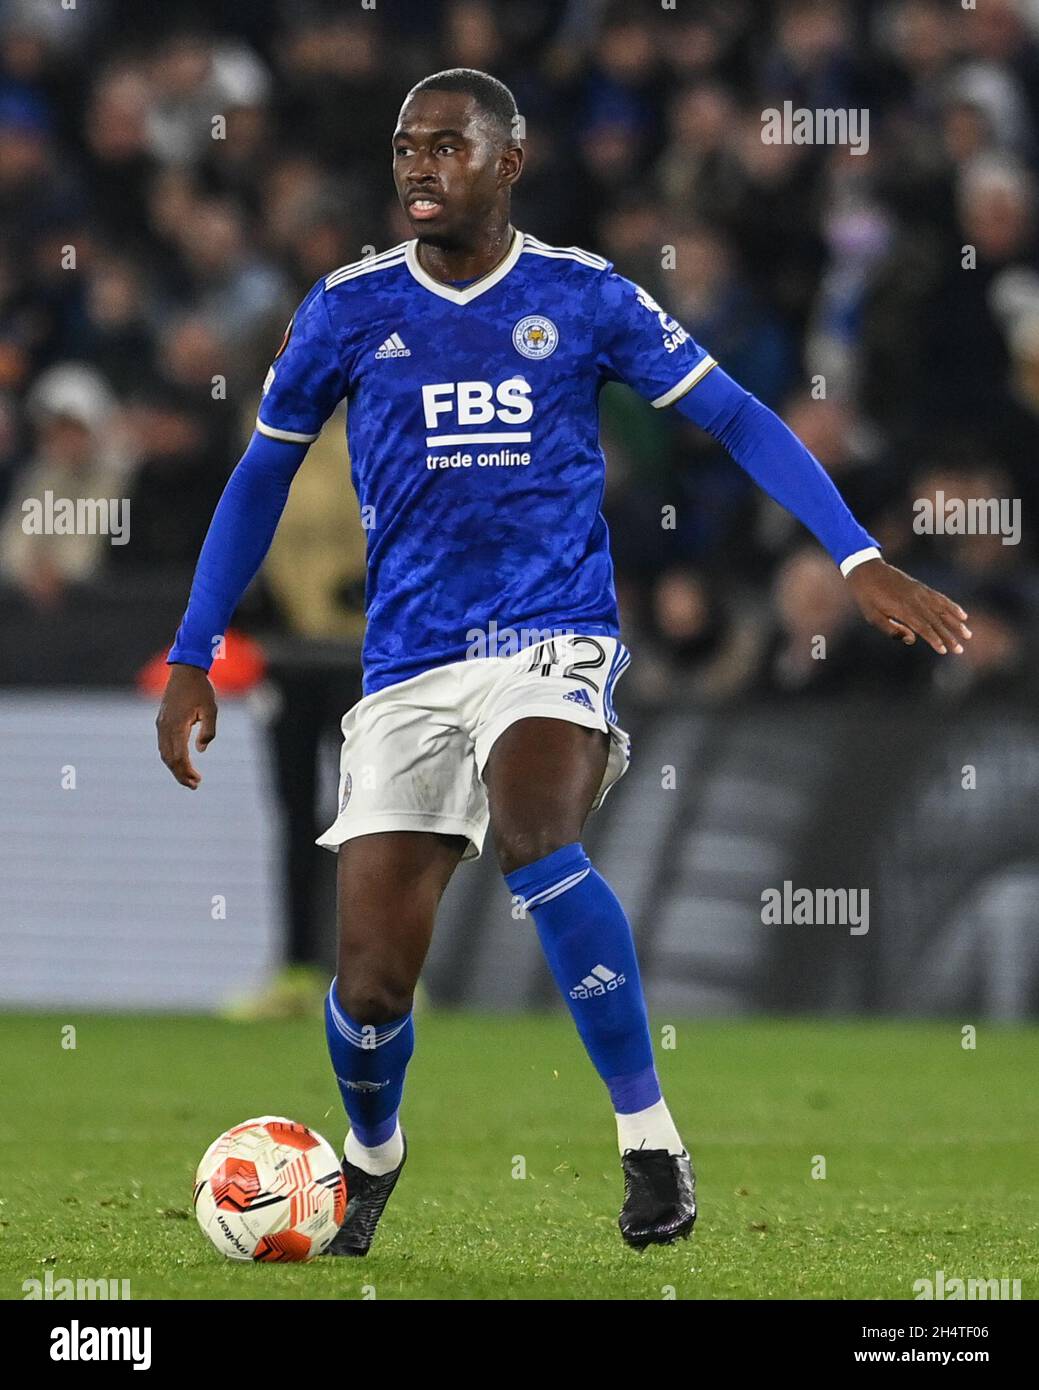 Boubakary Soumare #42 of Leicester City during the game Stock Photo